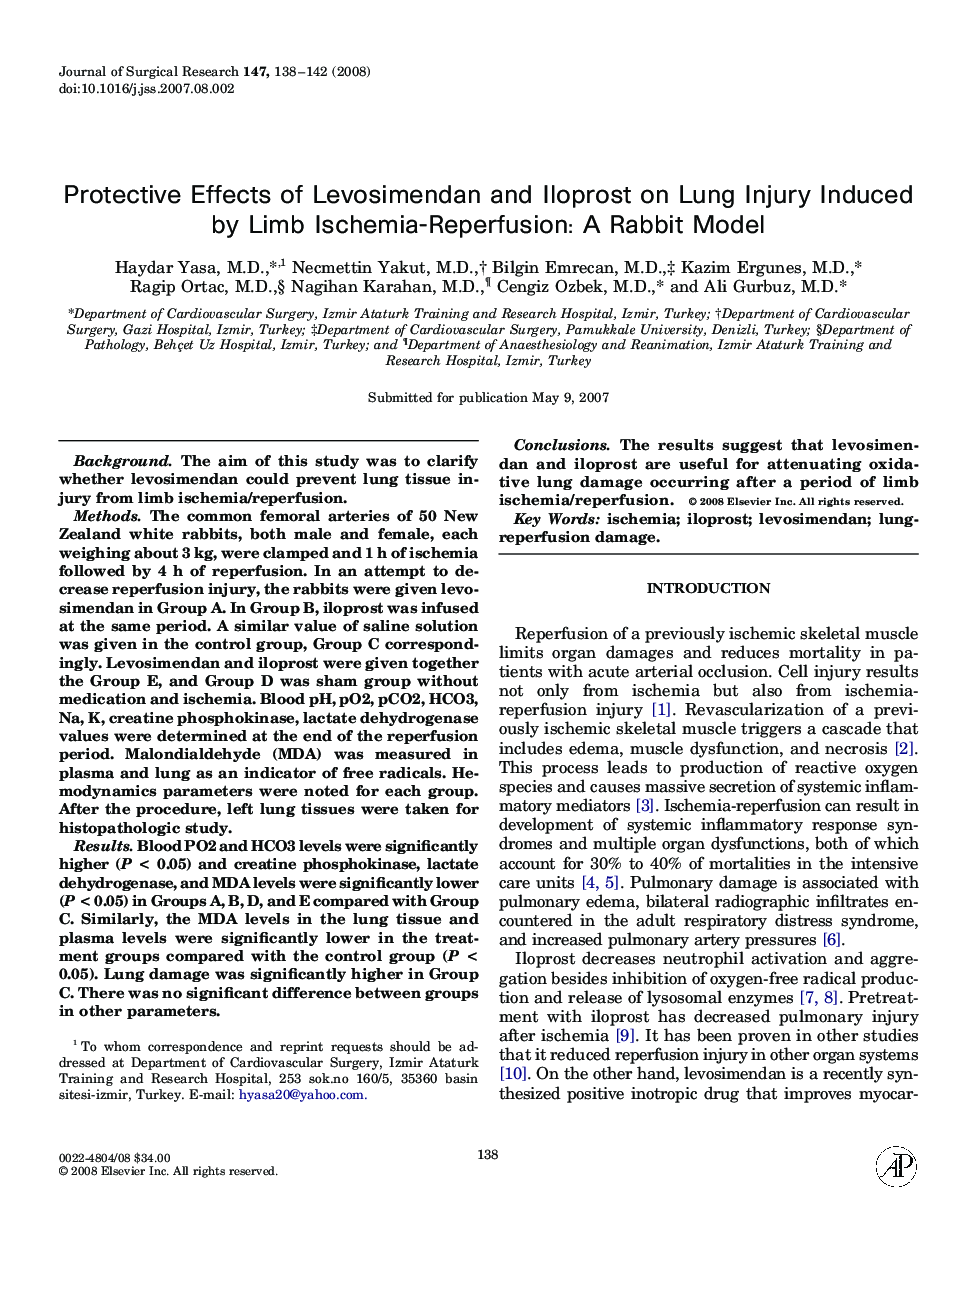 Protective Effects of Levosimendan and Iloprost on Lung Injury Induced by Limb Ischemia-Reperfusion: A Rabbit Model